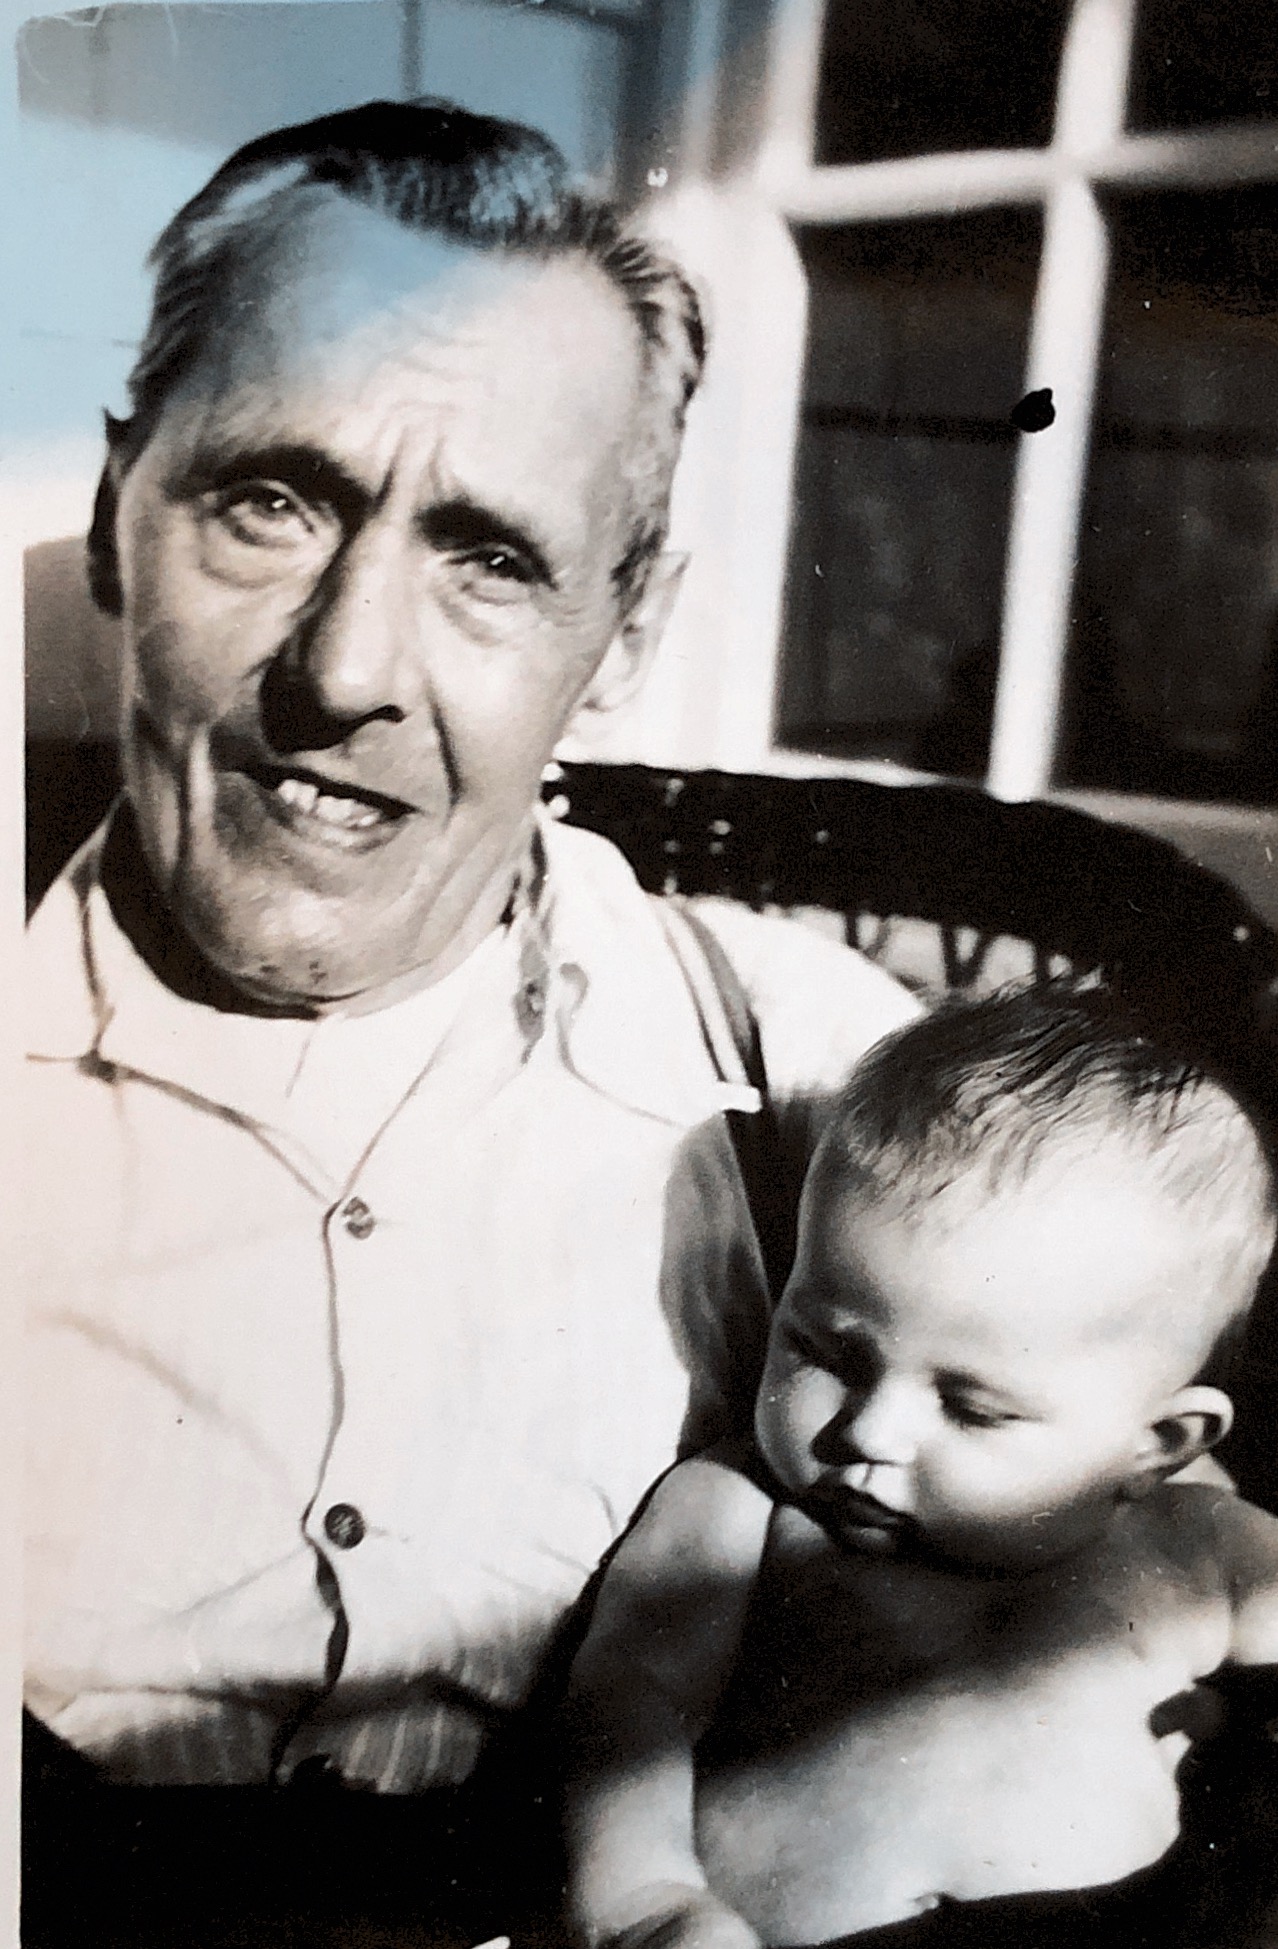 Me at my great grandfather Joseph Geiger, 1949